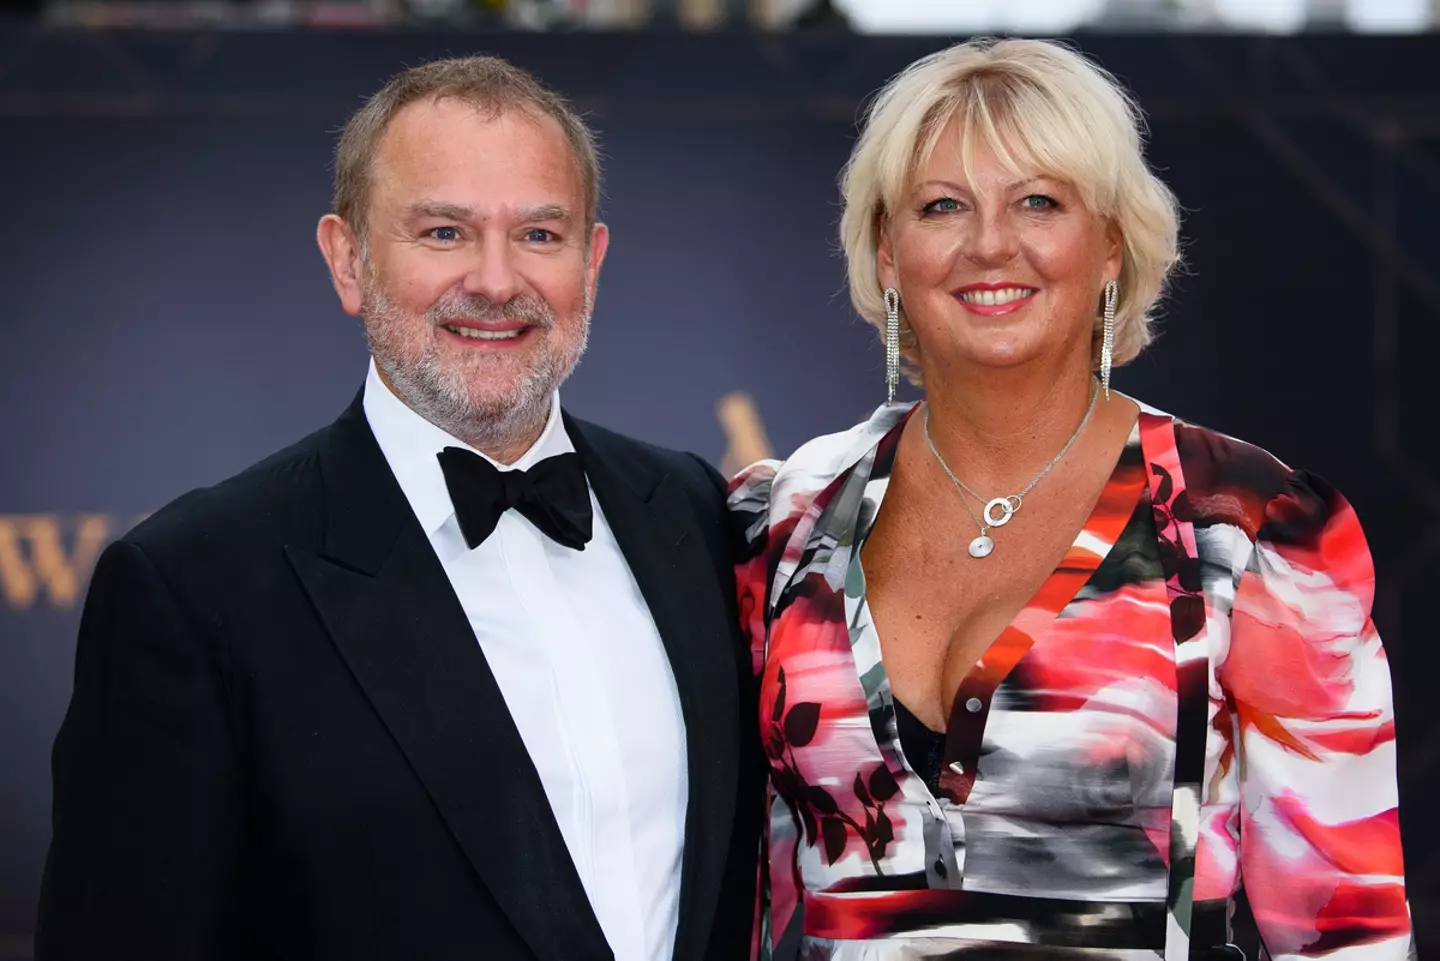 Hugh Bonneville and Lucinda 'Lulu' Williams have separated after 25 years of marriage together.